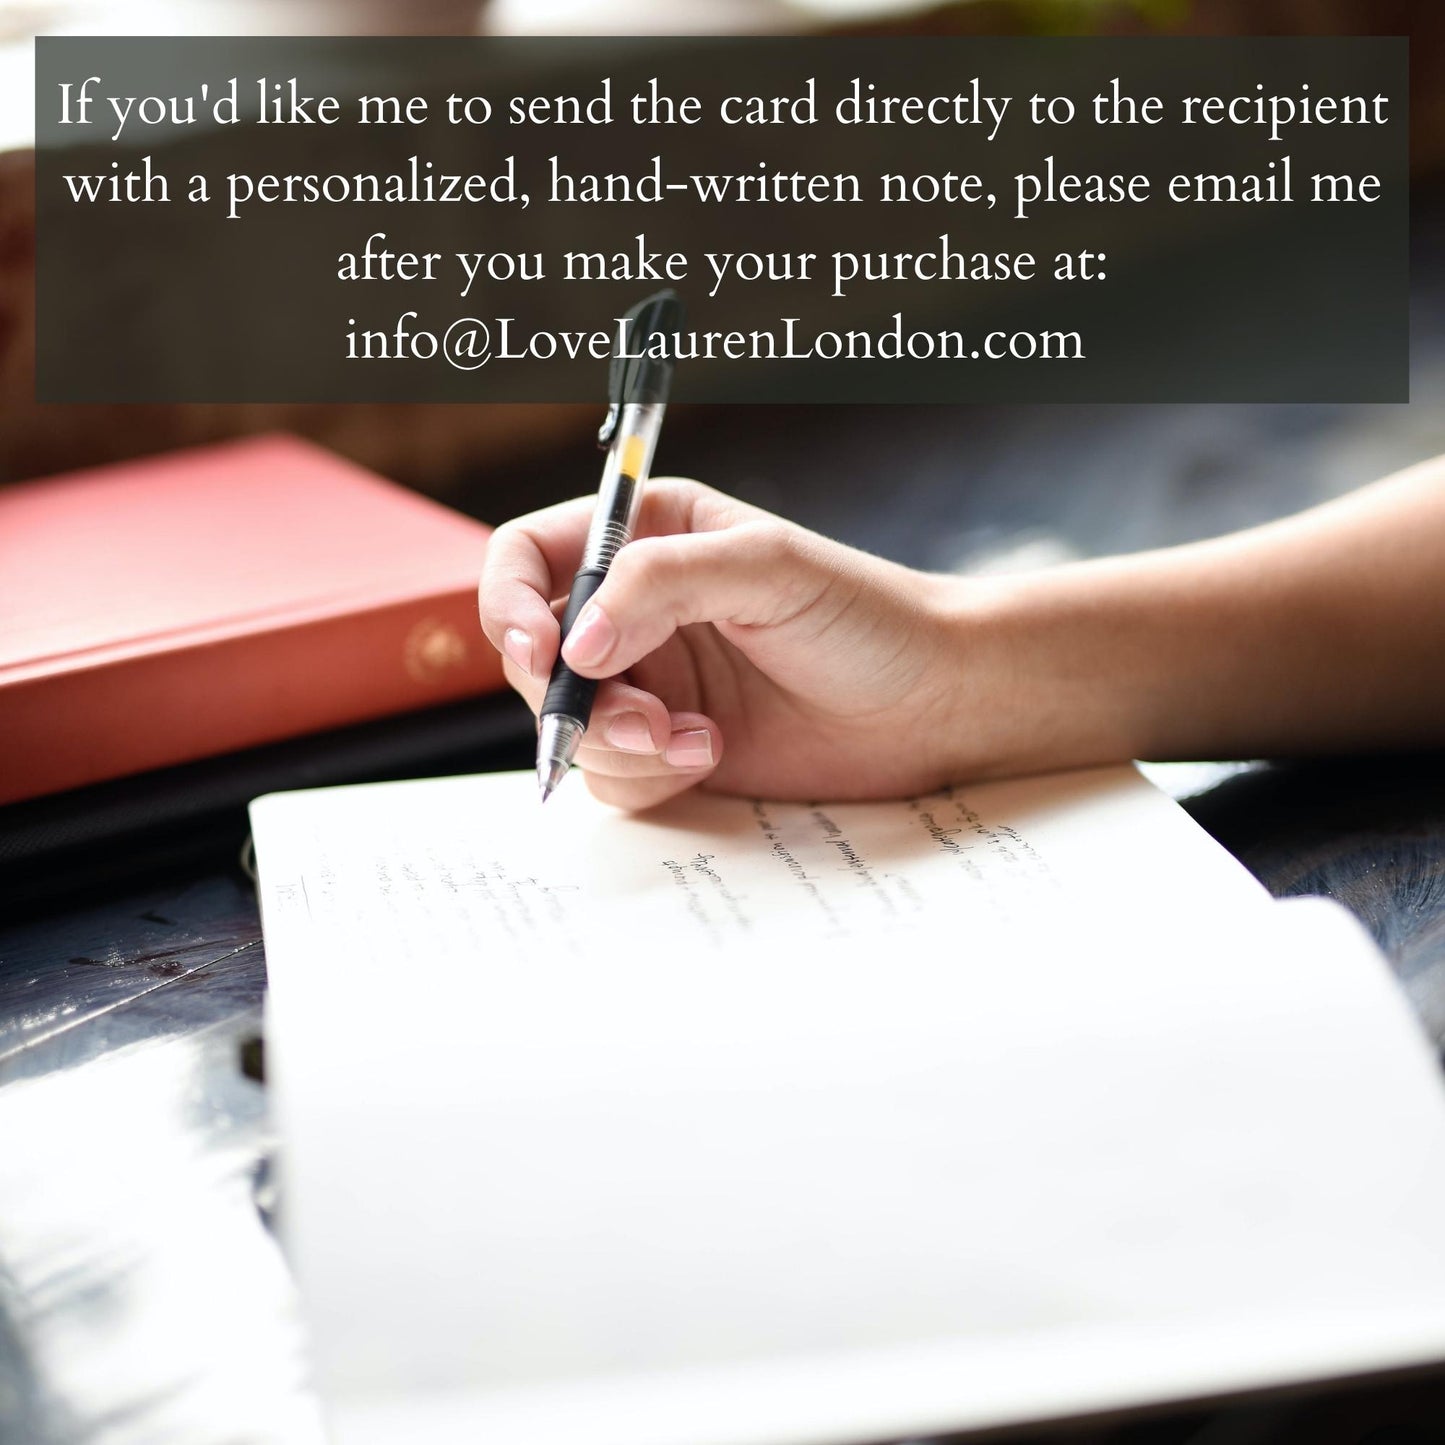 for no additonal fee i will hand-write a message of your choosing and mail it directly to your loved one